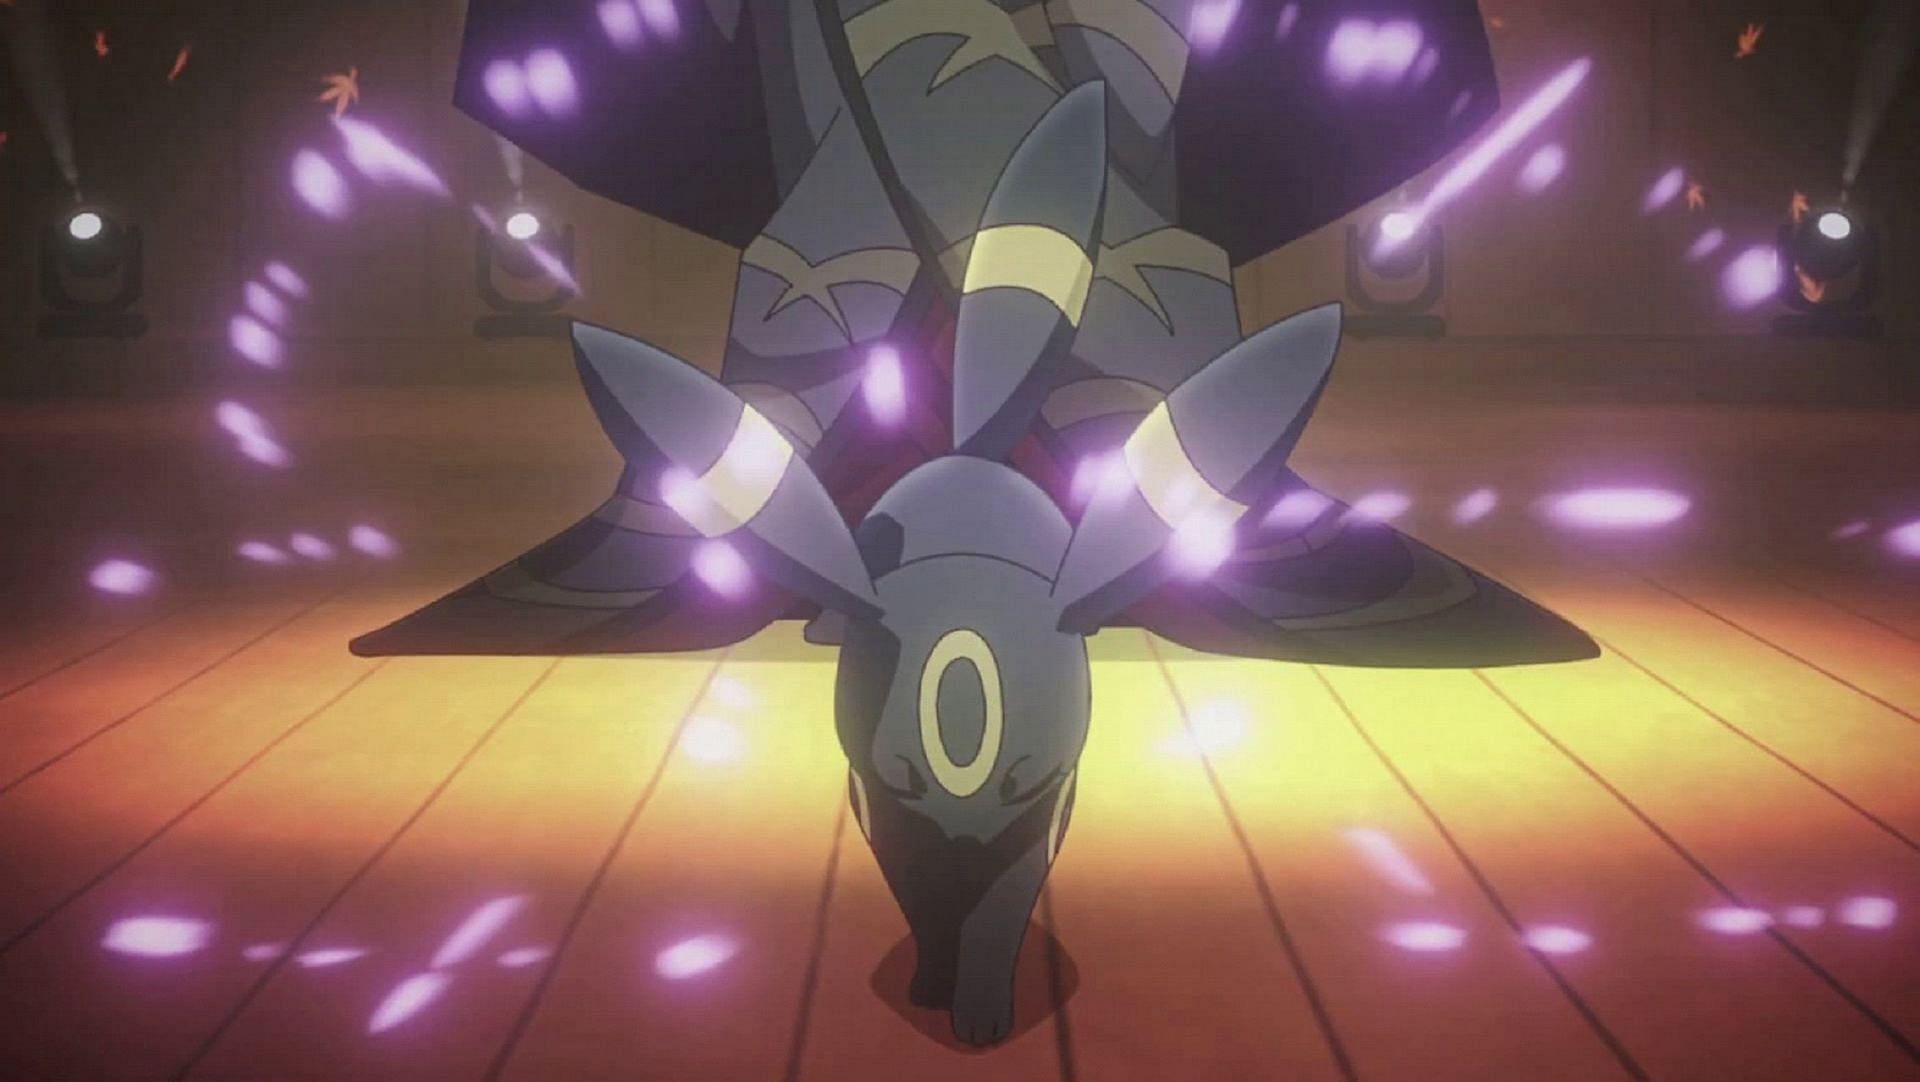 Umbreon as it appears in the anime (Image via The Pokemon Company)